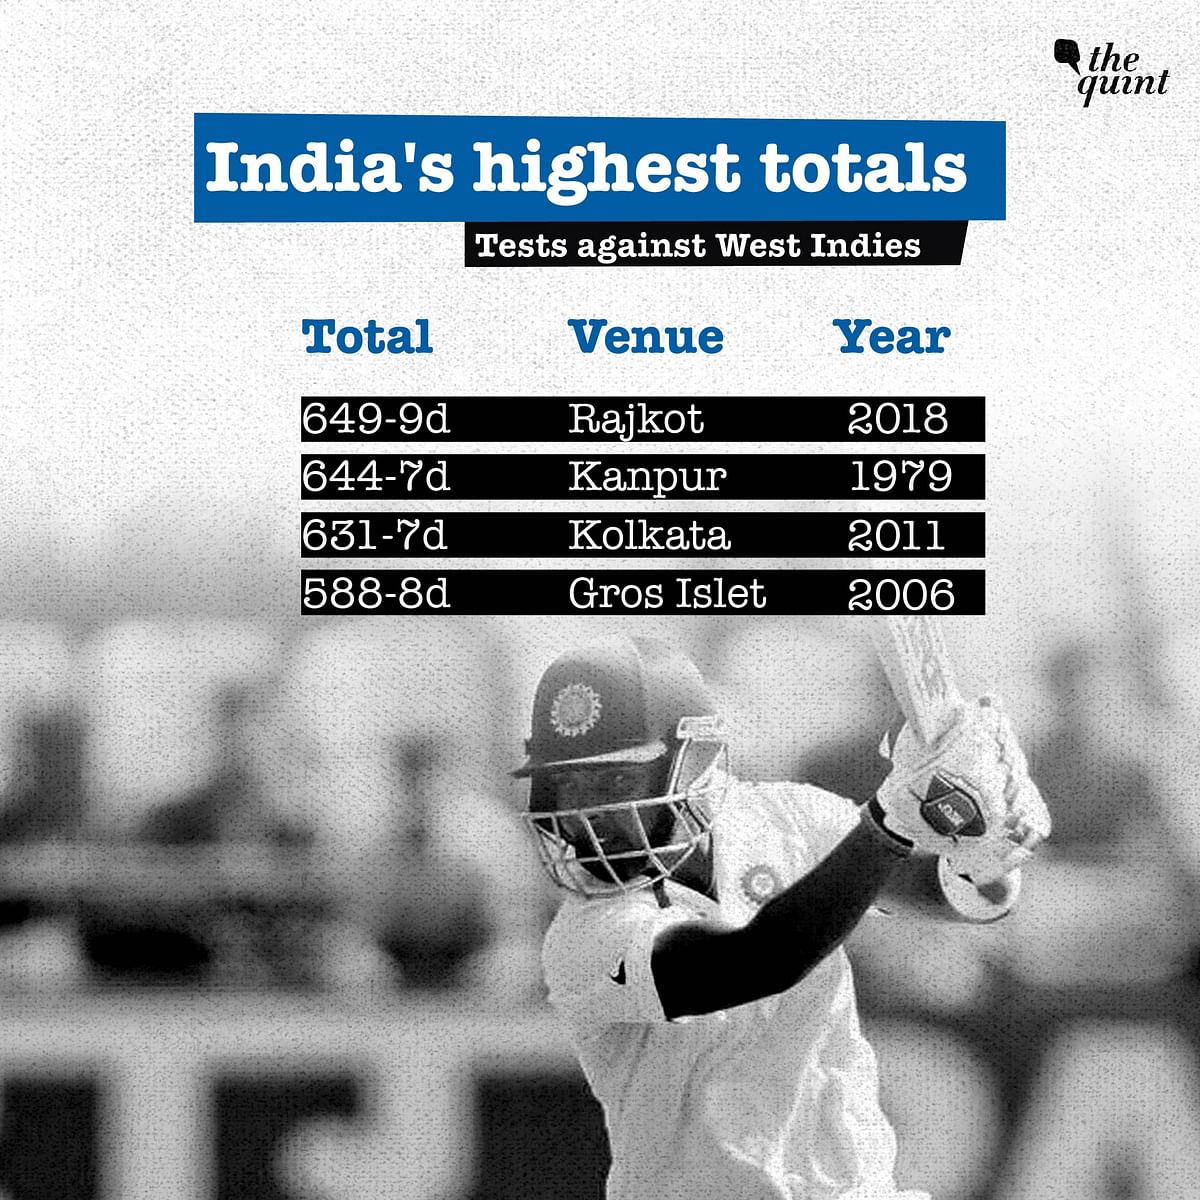 Virat Kohli also became the quickest Indian (and the second-fastest batsman overall) to score 24 Test centuries.